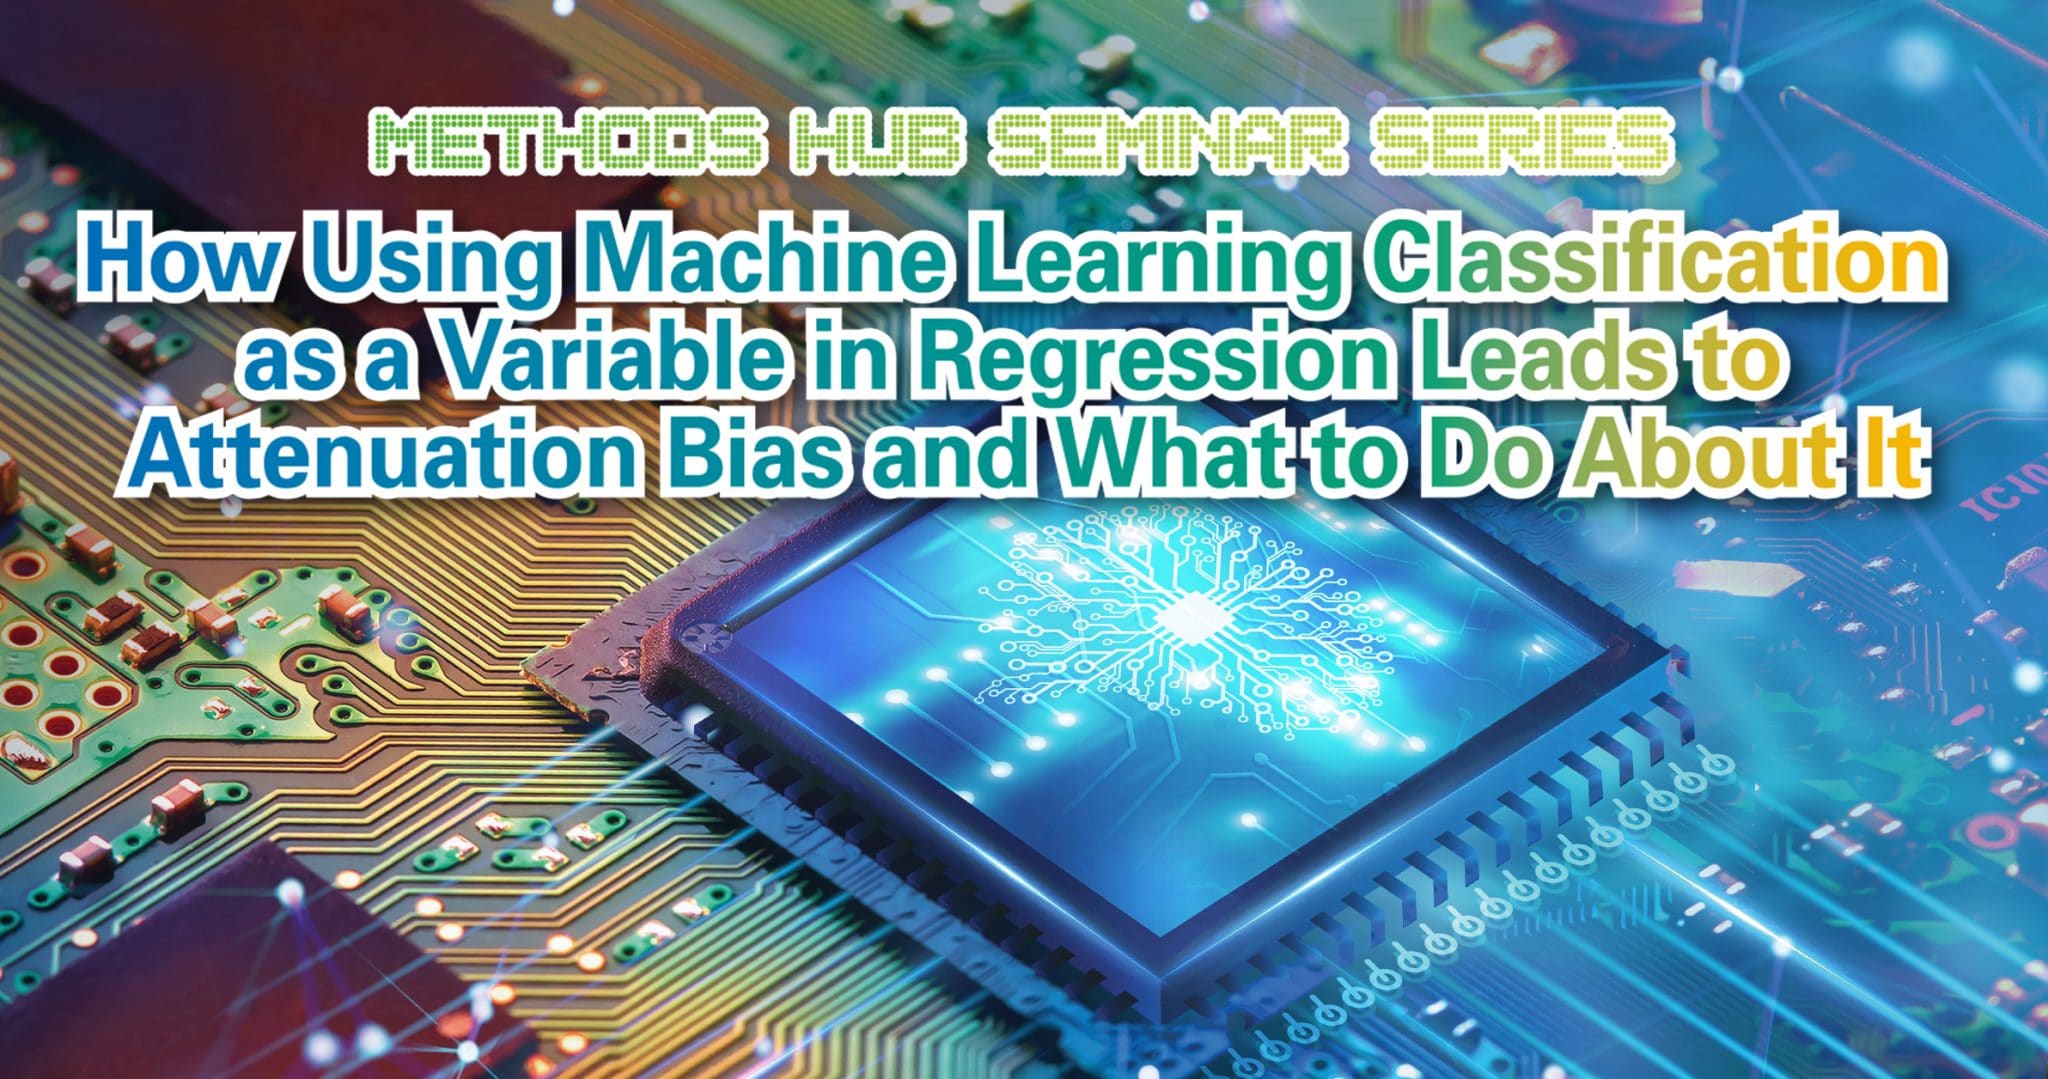 Seminar Banner - How Using Machine Learning Classification as a Variable in Regression Leads to Attenuation Bias and What to Do About It